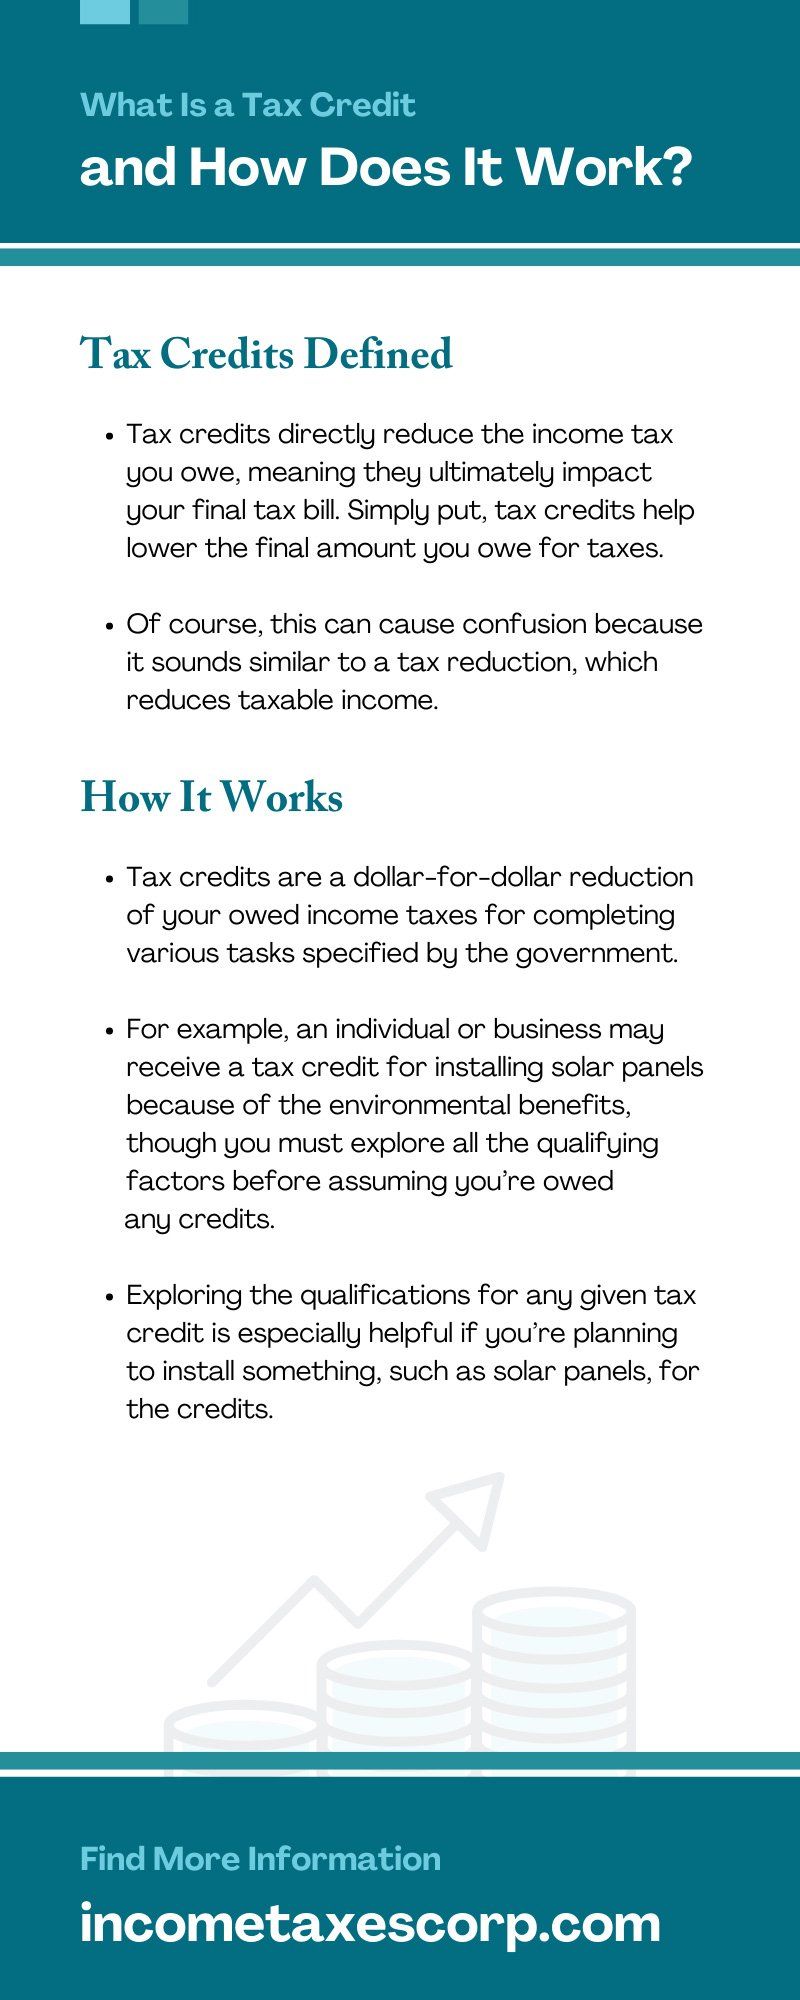 What Is a Tax Credit and How Does It Work?